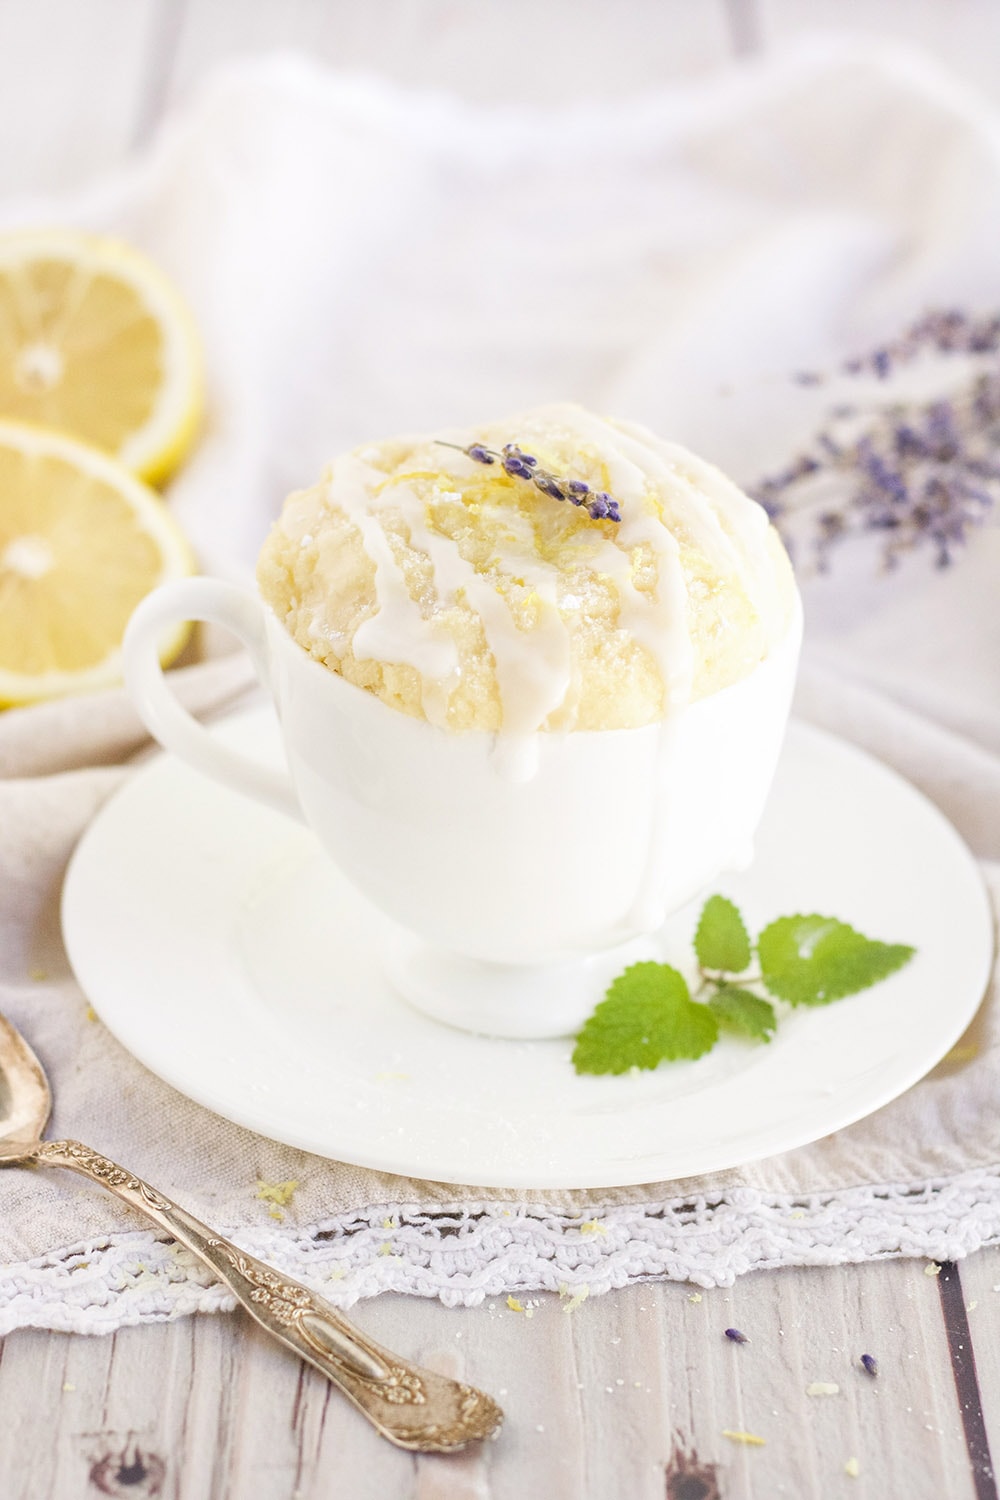 Lemon cake in a mug with lemons and lavender around on the table.